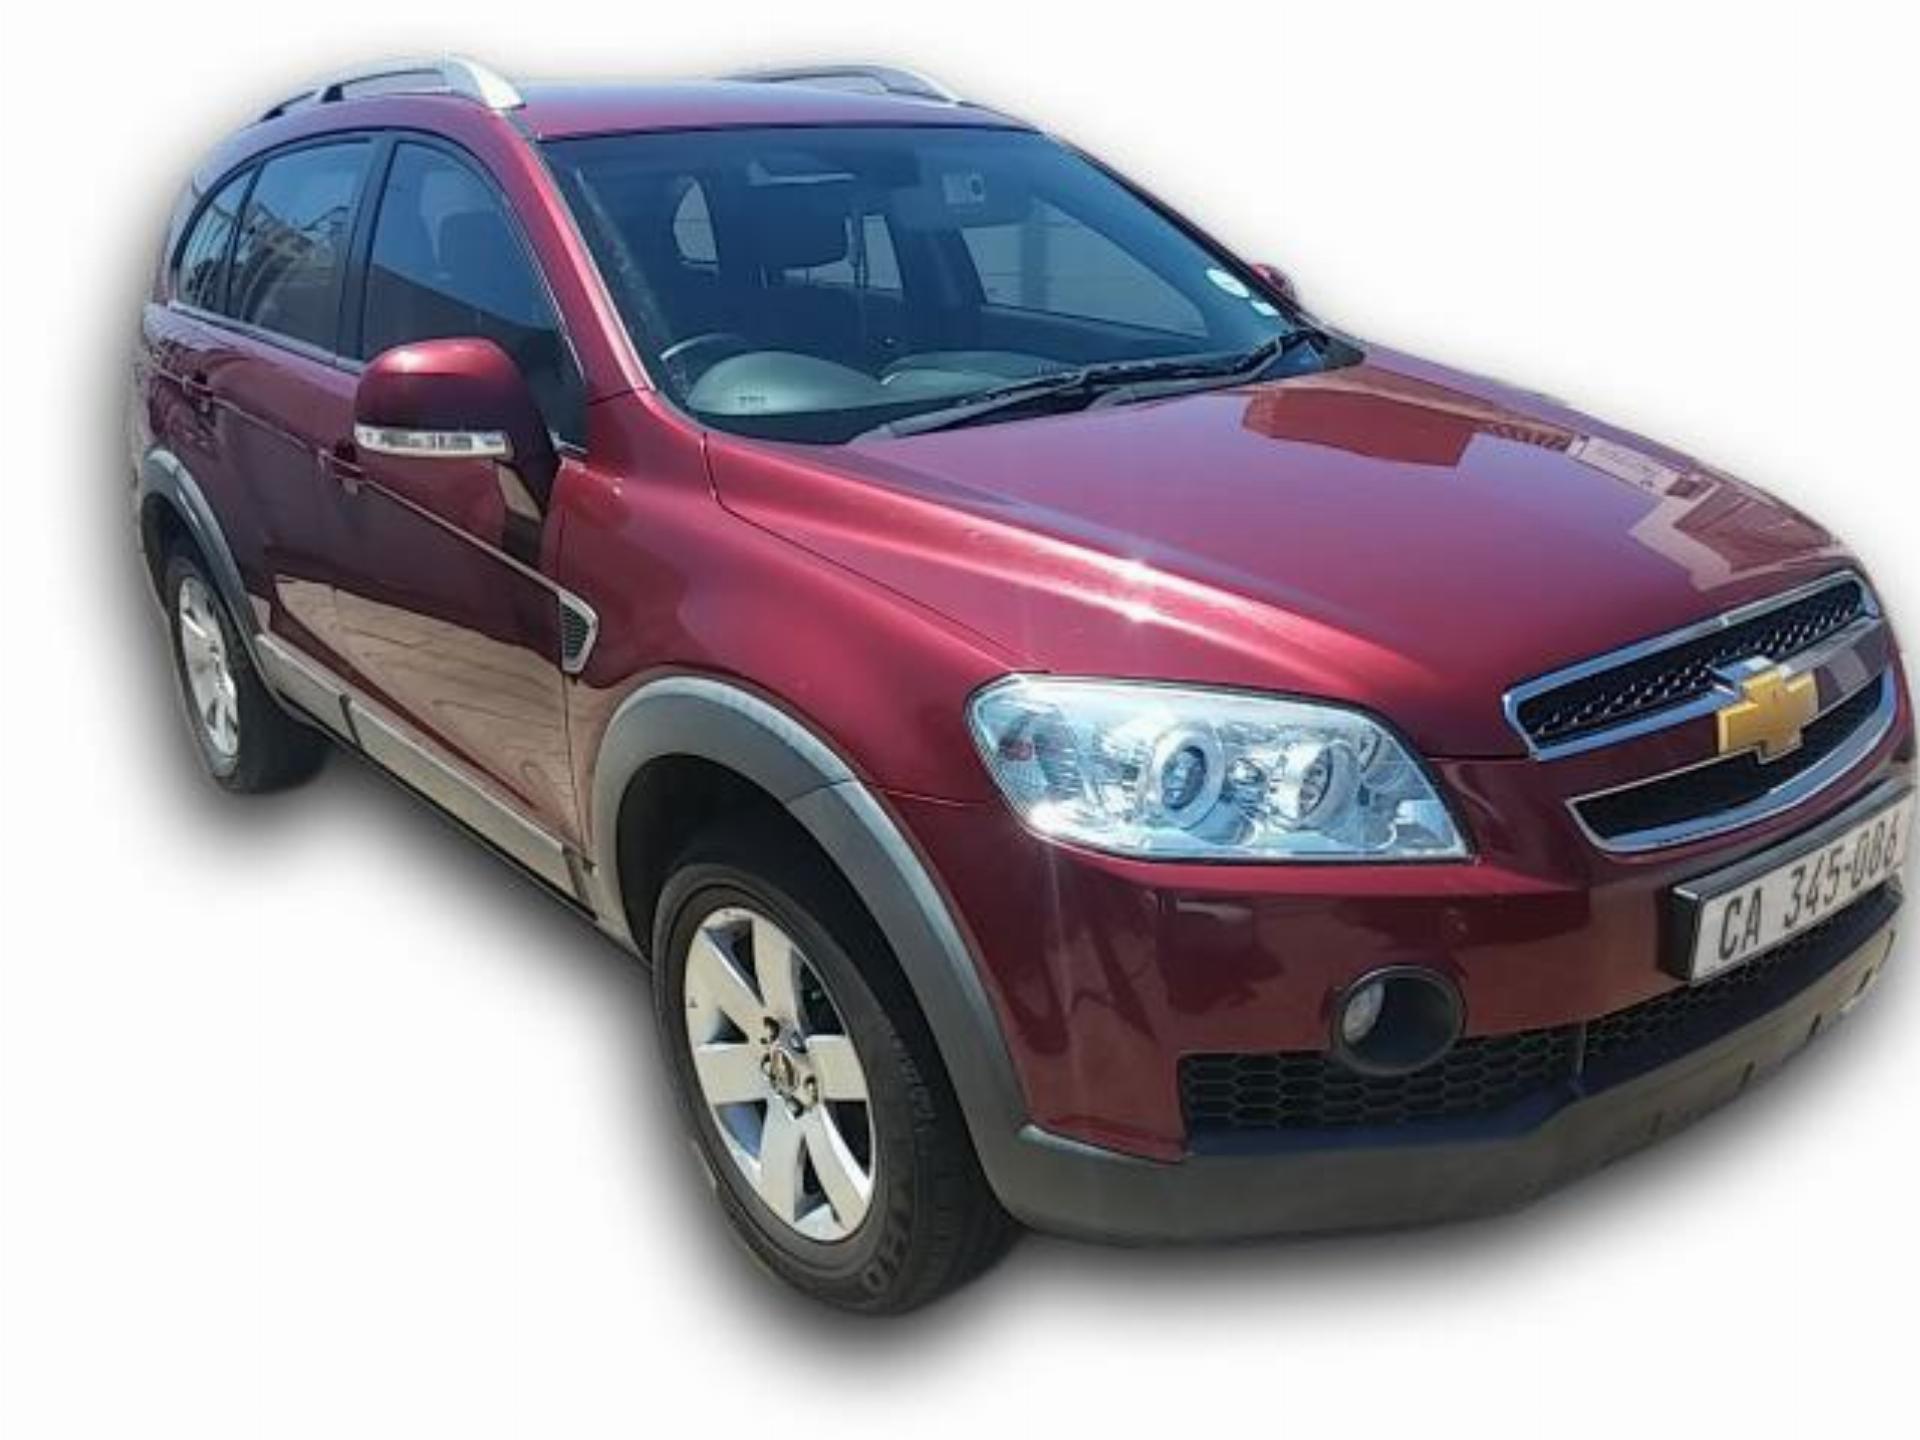 Used Chevrolet Captiva 2.4 FWD LT 2008 on auction PV1010081